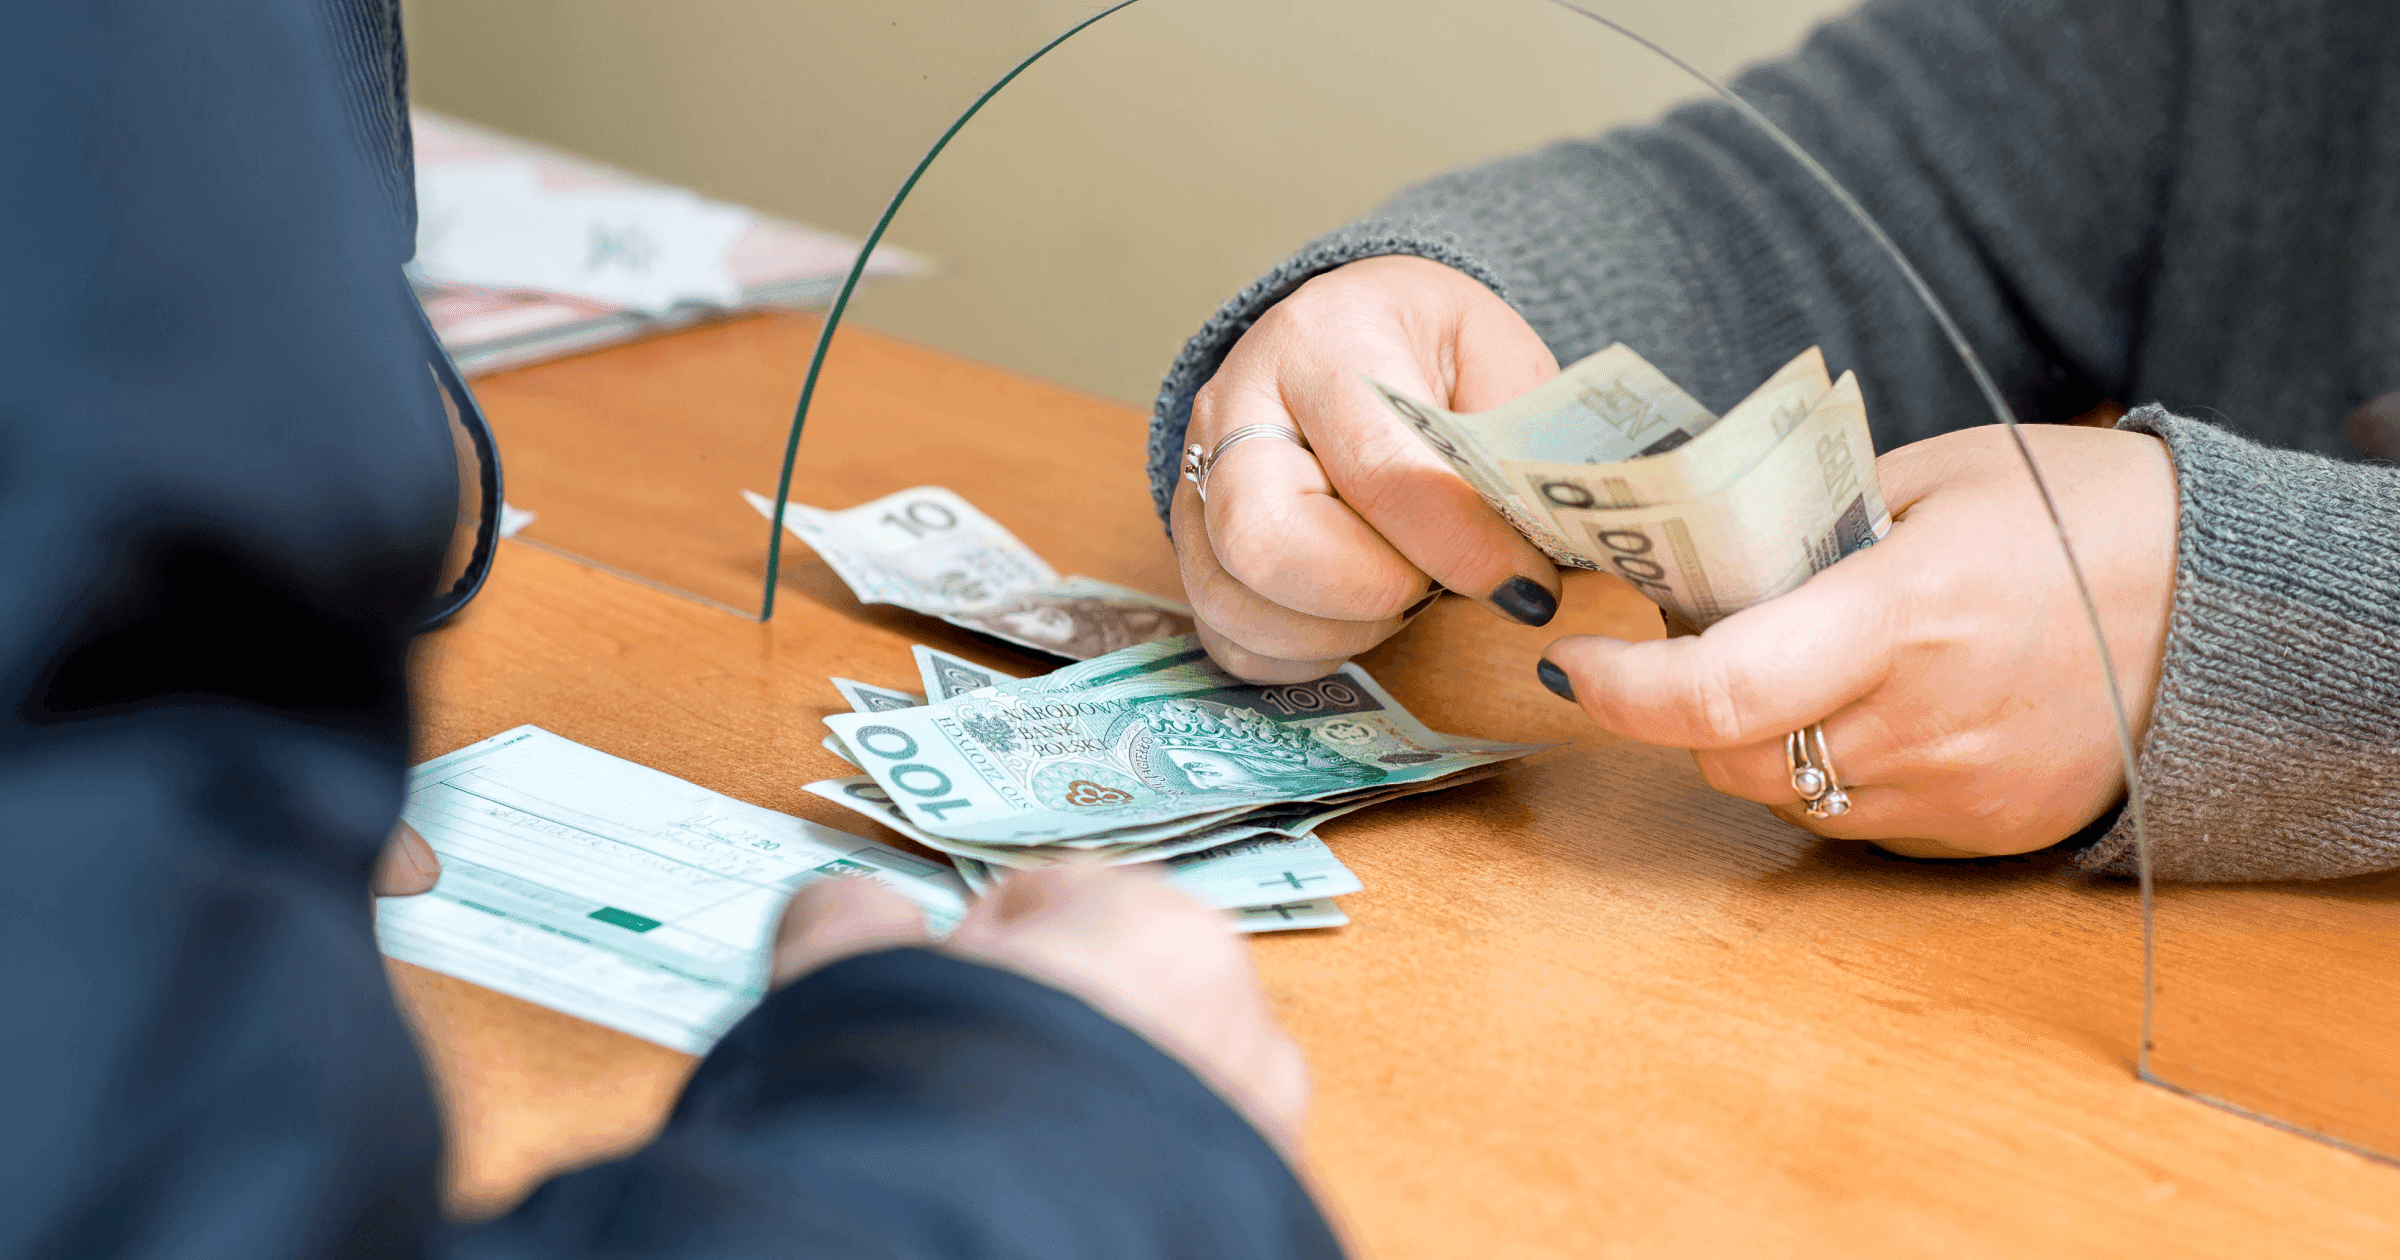 Where to exchange currency in Poland